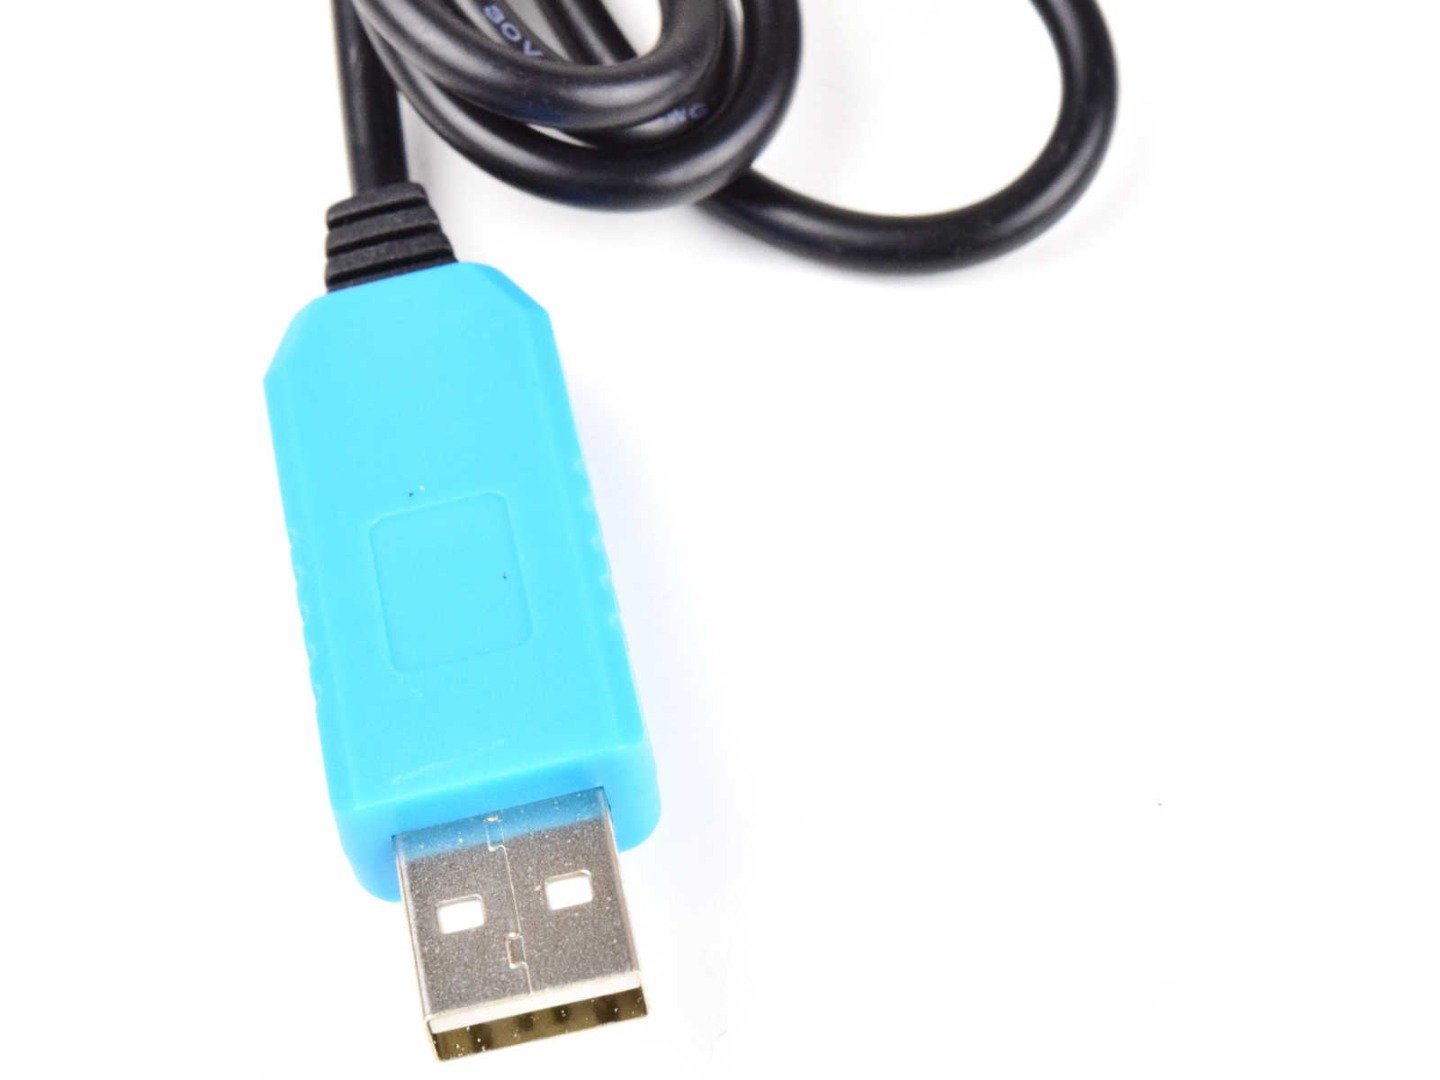 Details about   PL2303TA For Win 8 Xp Vista 7 8.1 USB TTL To RS232 Converter Serial Cable Modue 